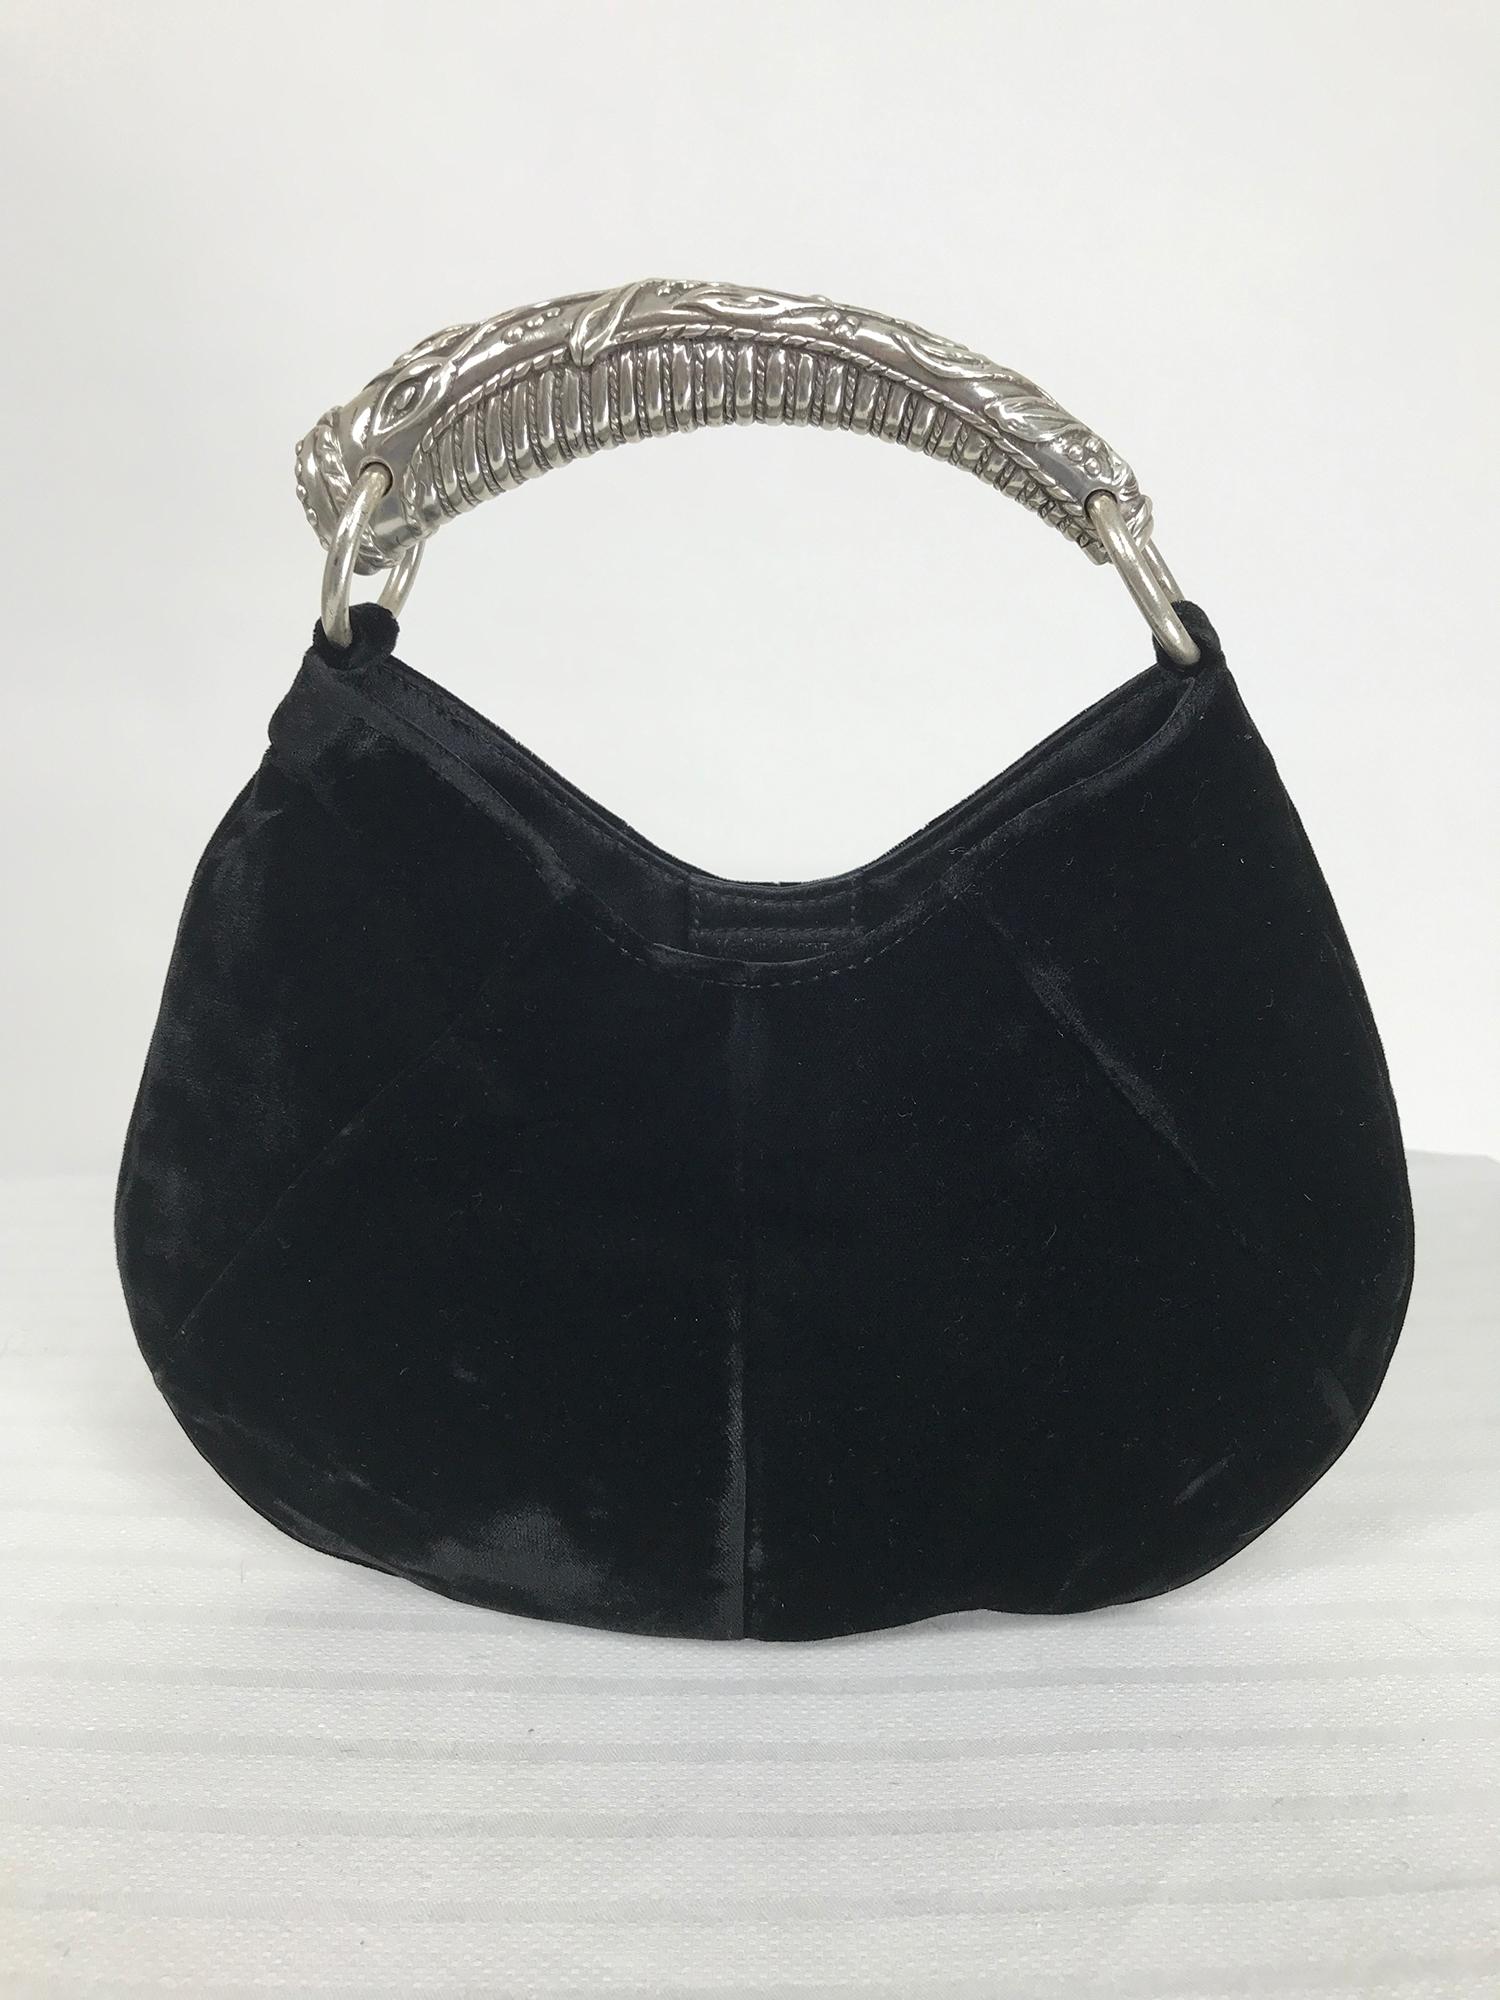 Yves Saint Laurent velvet mini Mombasa handbag designed by Tom Ford.  Repousse silver metal handle, the bag is black velvet, seamed to shape with a curved bottom. The bag is lined and there is an interior slip pocket. Closes at the inside top with a